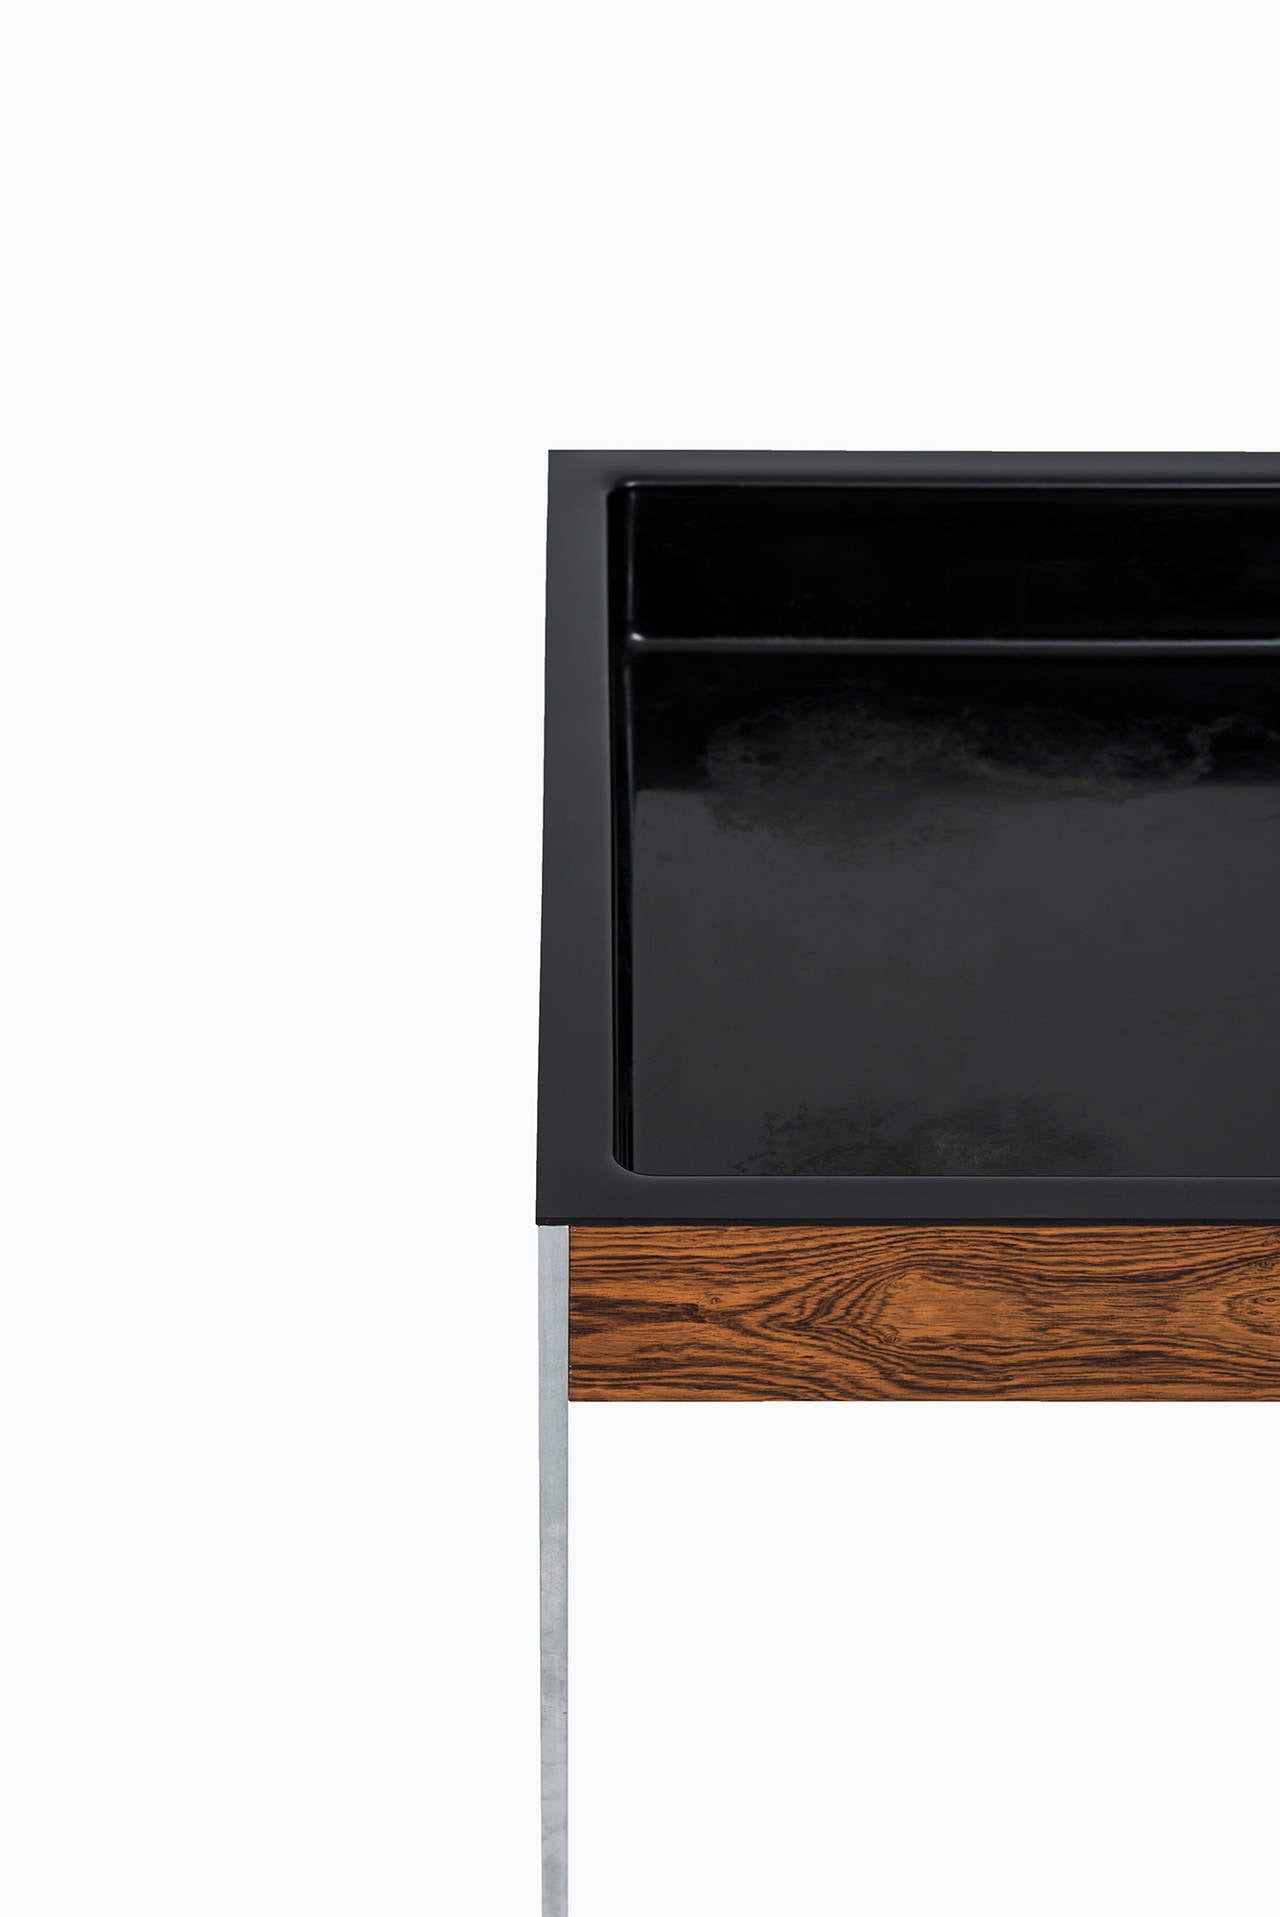 Rare plant stand in rosewood and steel designed by Uno & Östen Kristiansson. Produced by Luxus in Vittsjö, Sweden.